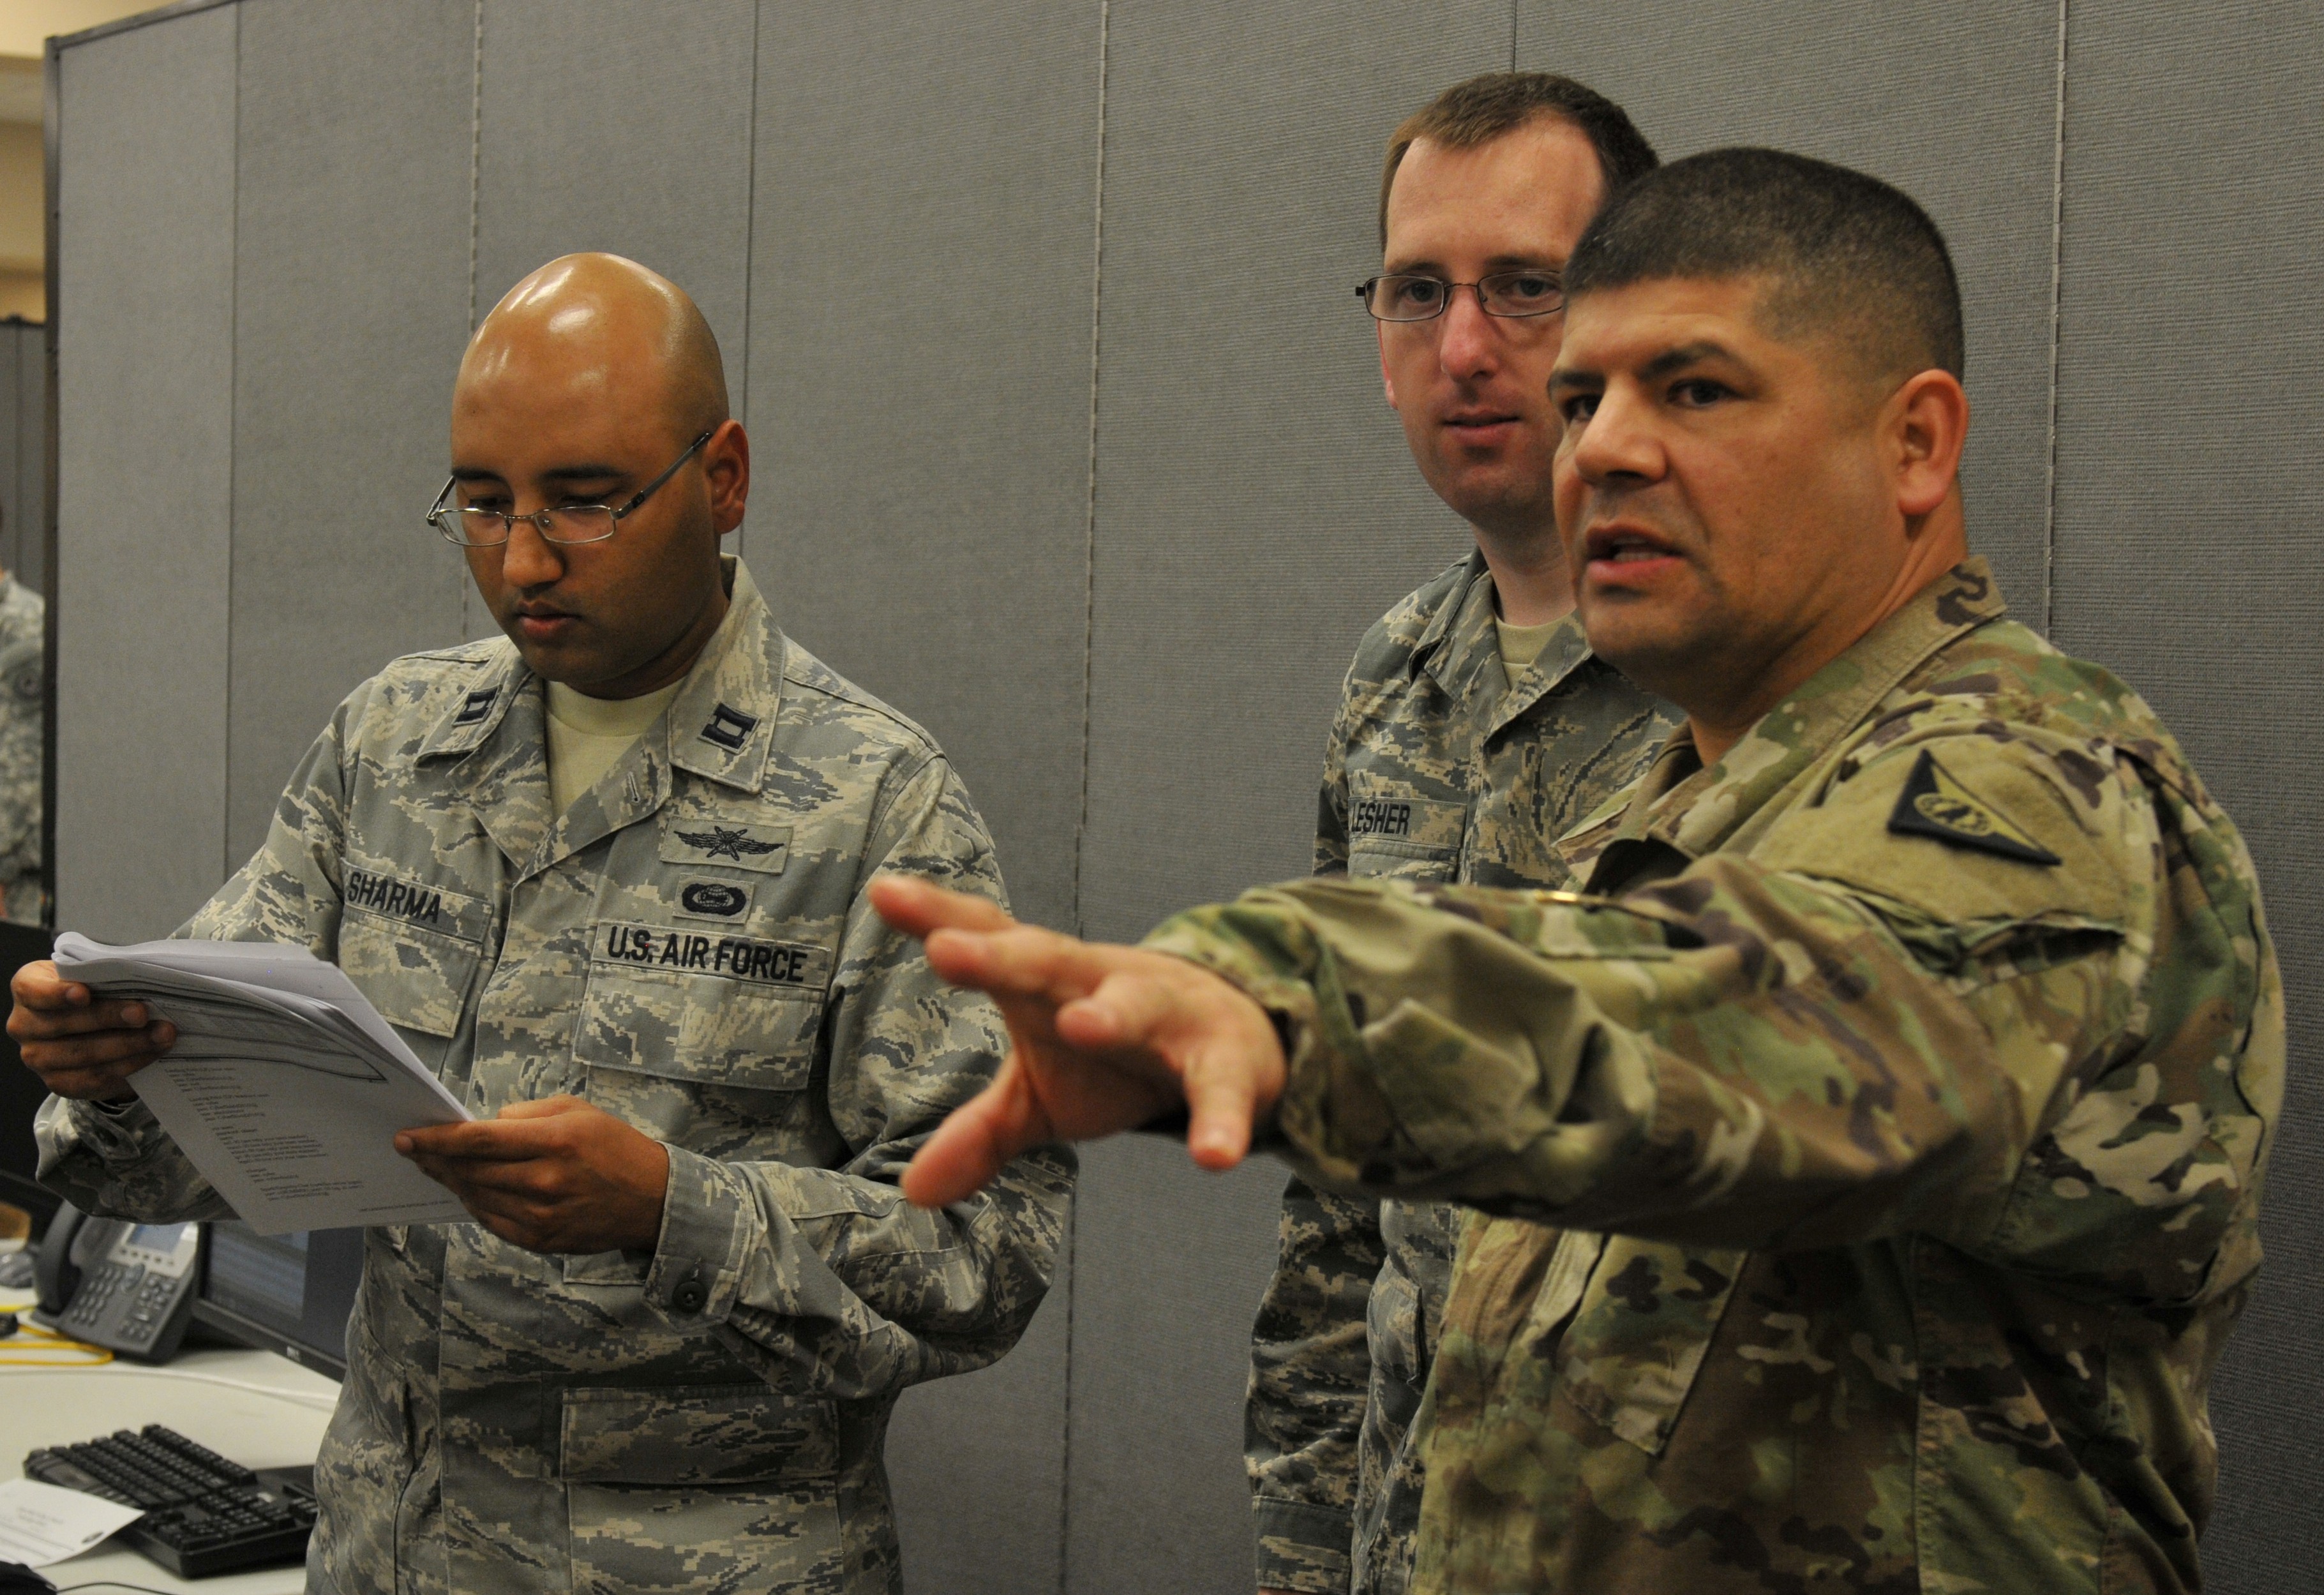 Army taps innovation for cyber training | Article | The United States Army